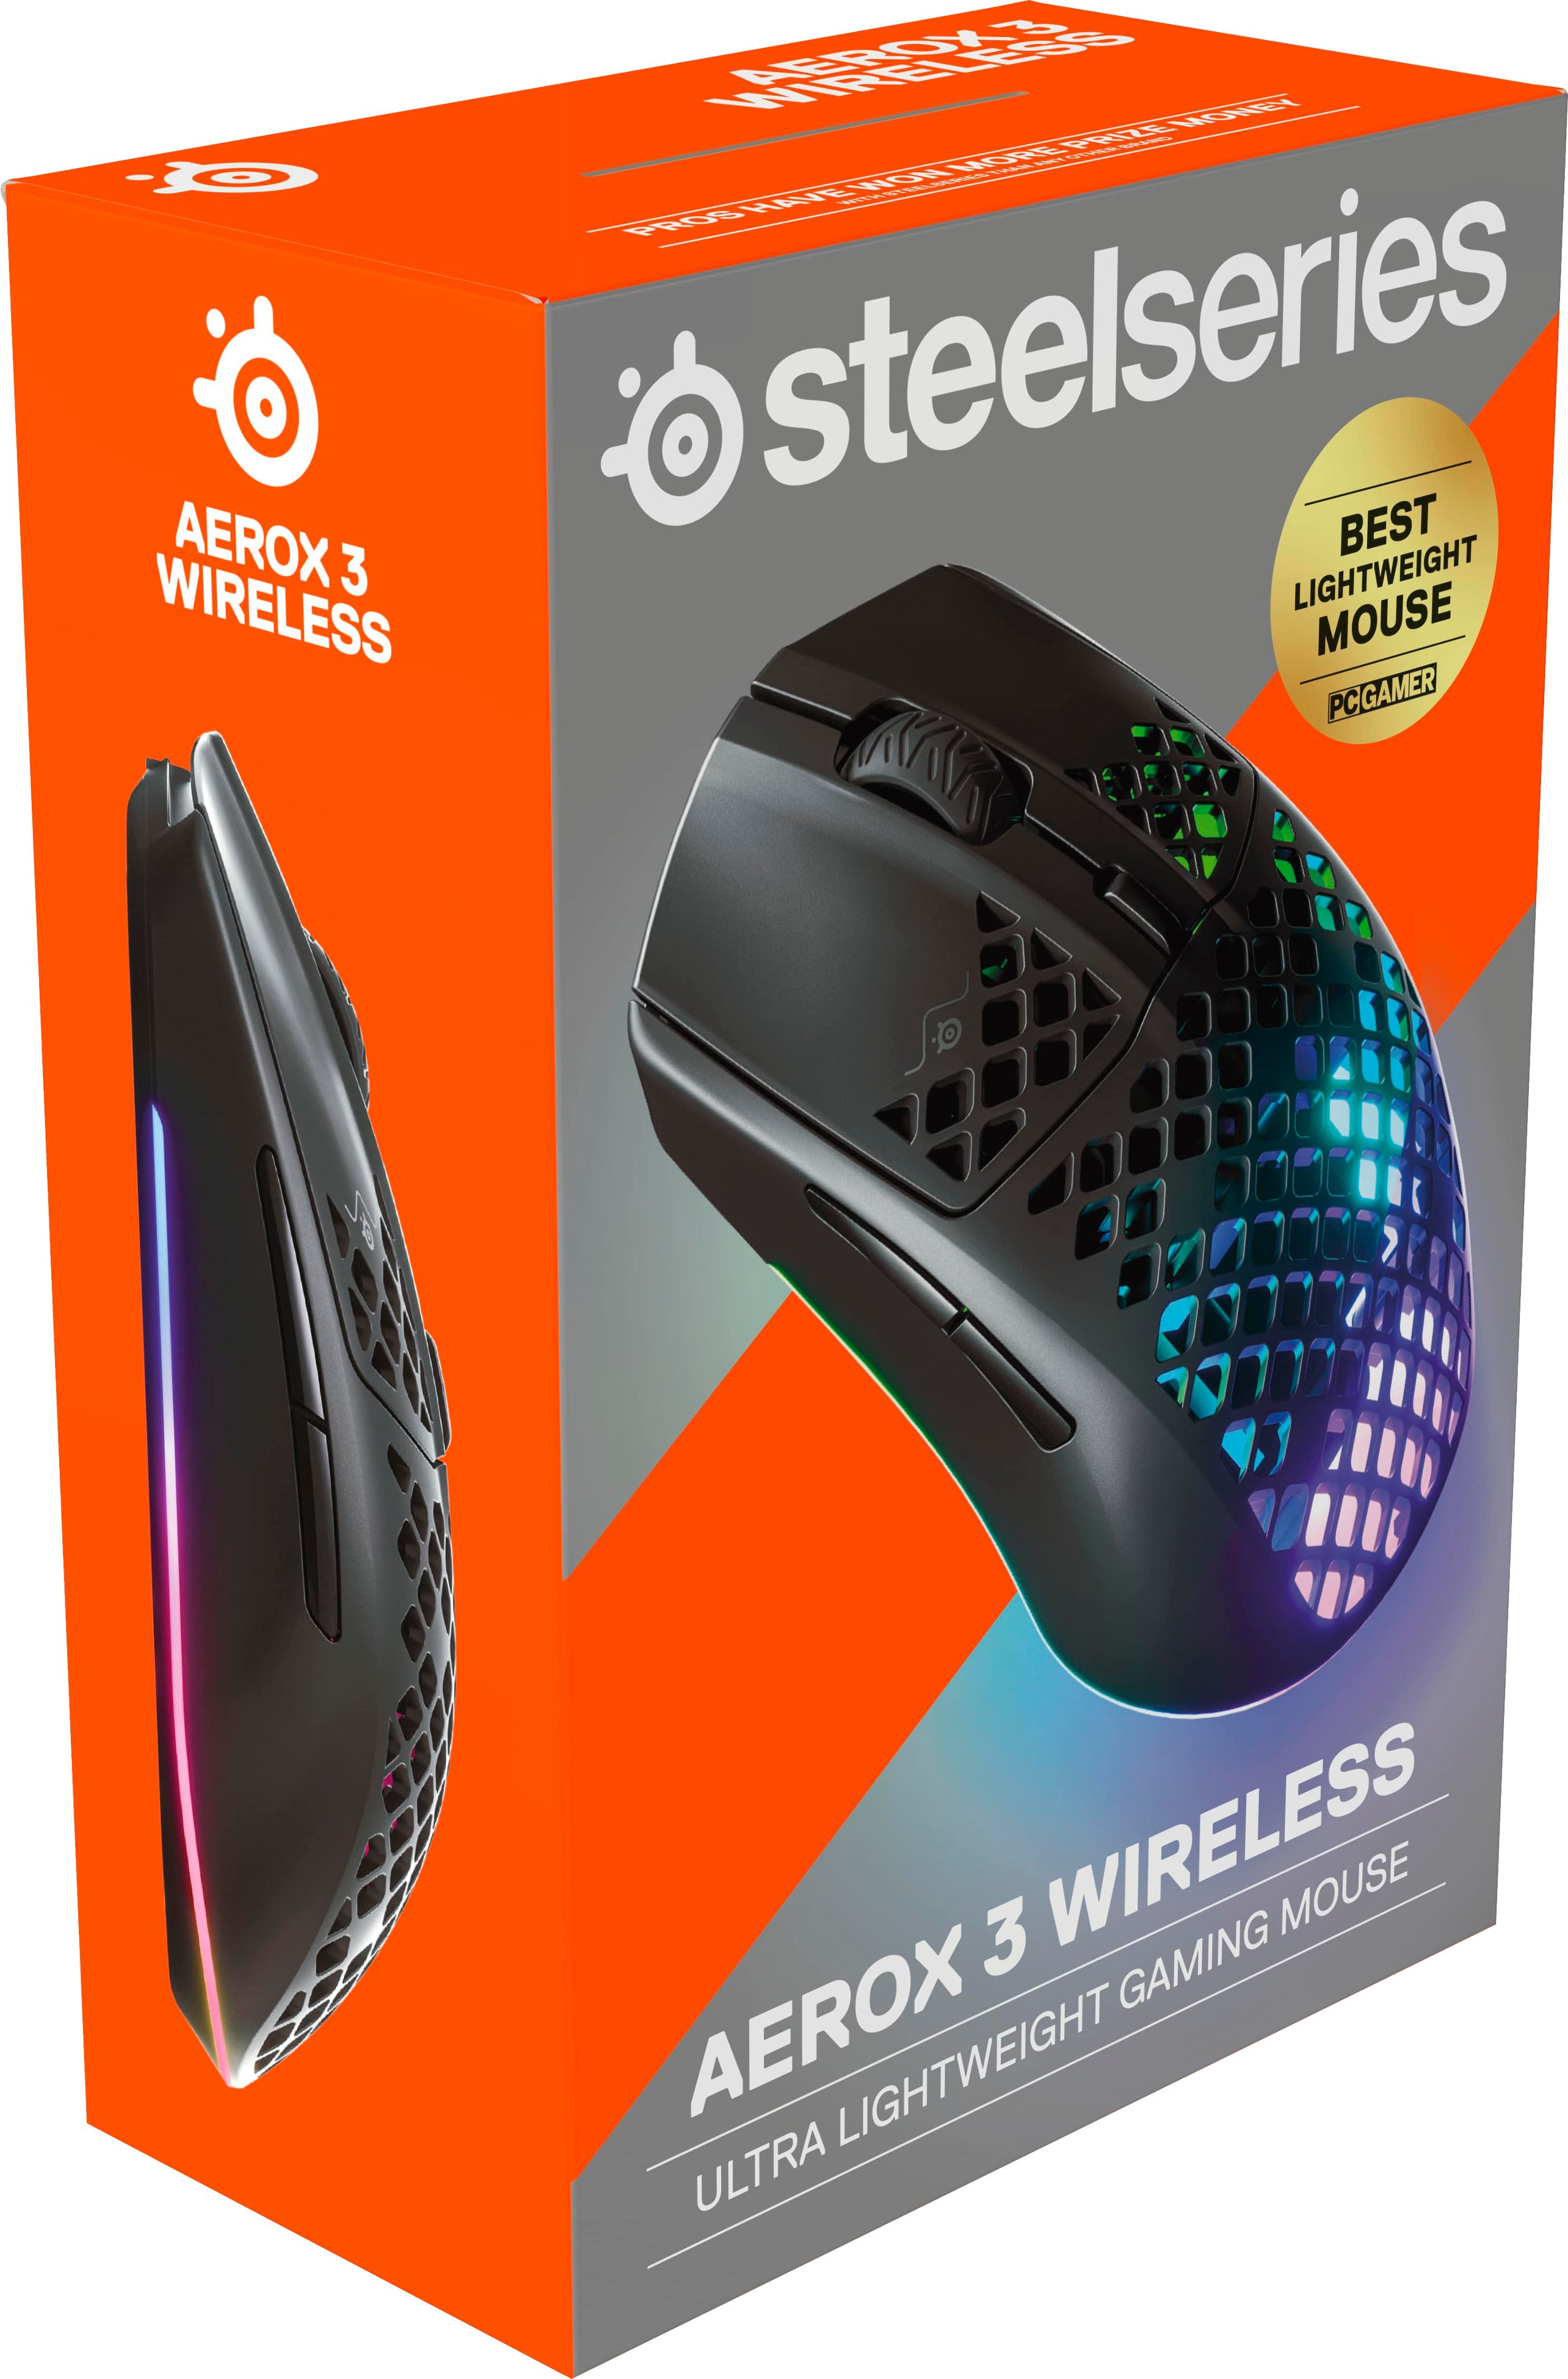 3 SteelSeries Optical Gaming Best Onyx Honeycomb Light Super - Buy Wireless RGB Aerox 62612 Mouse